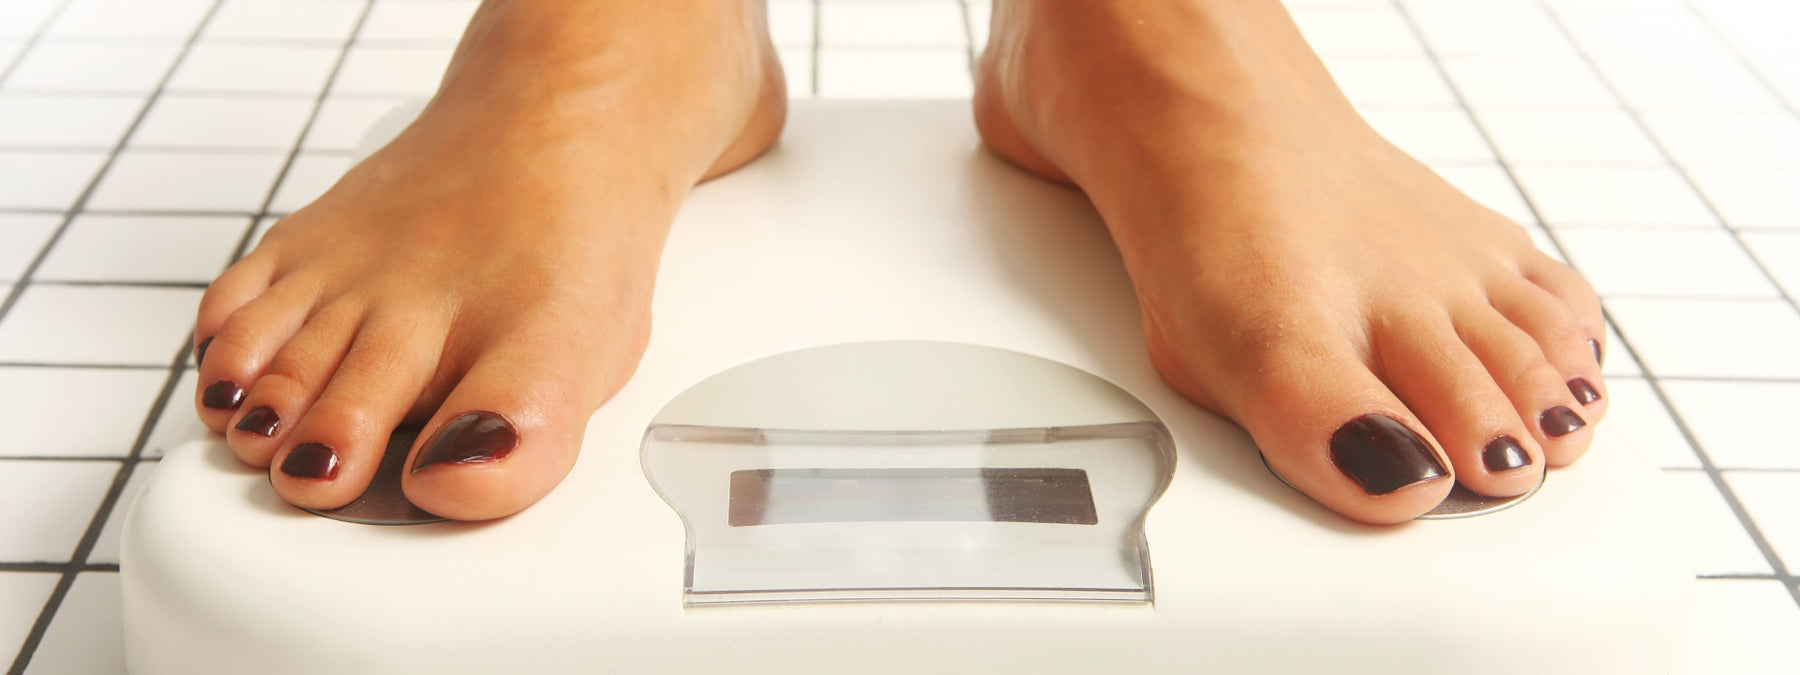 Throw Your Bathroom Scale Away! Why it May Be Your Worst Enemy